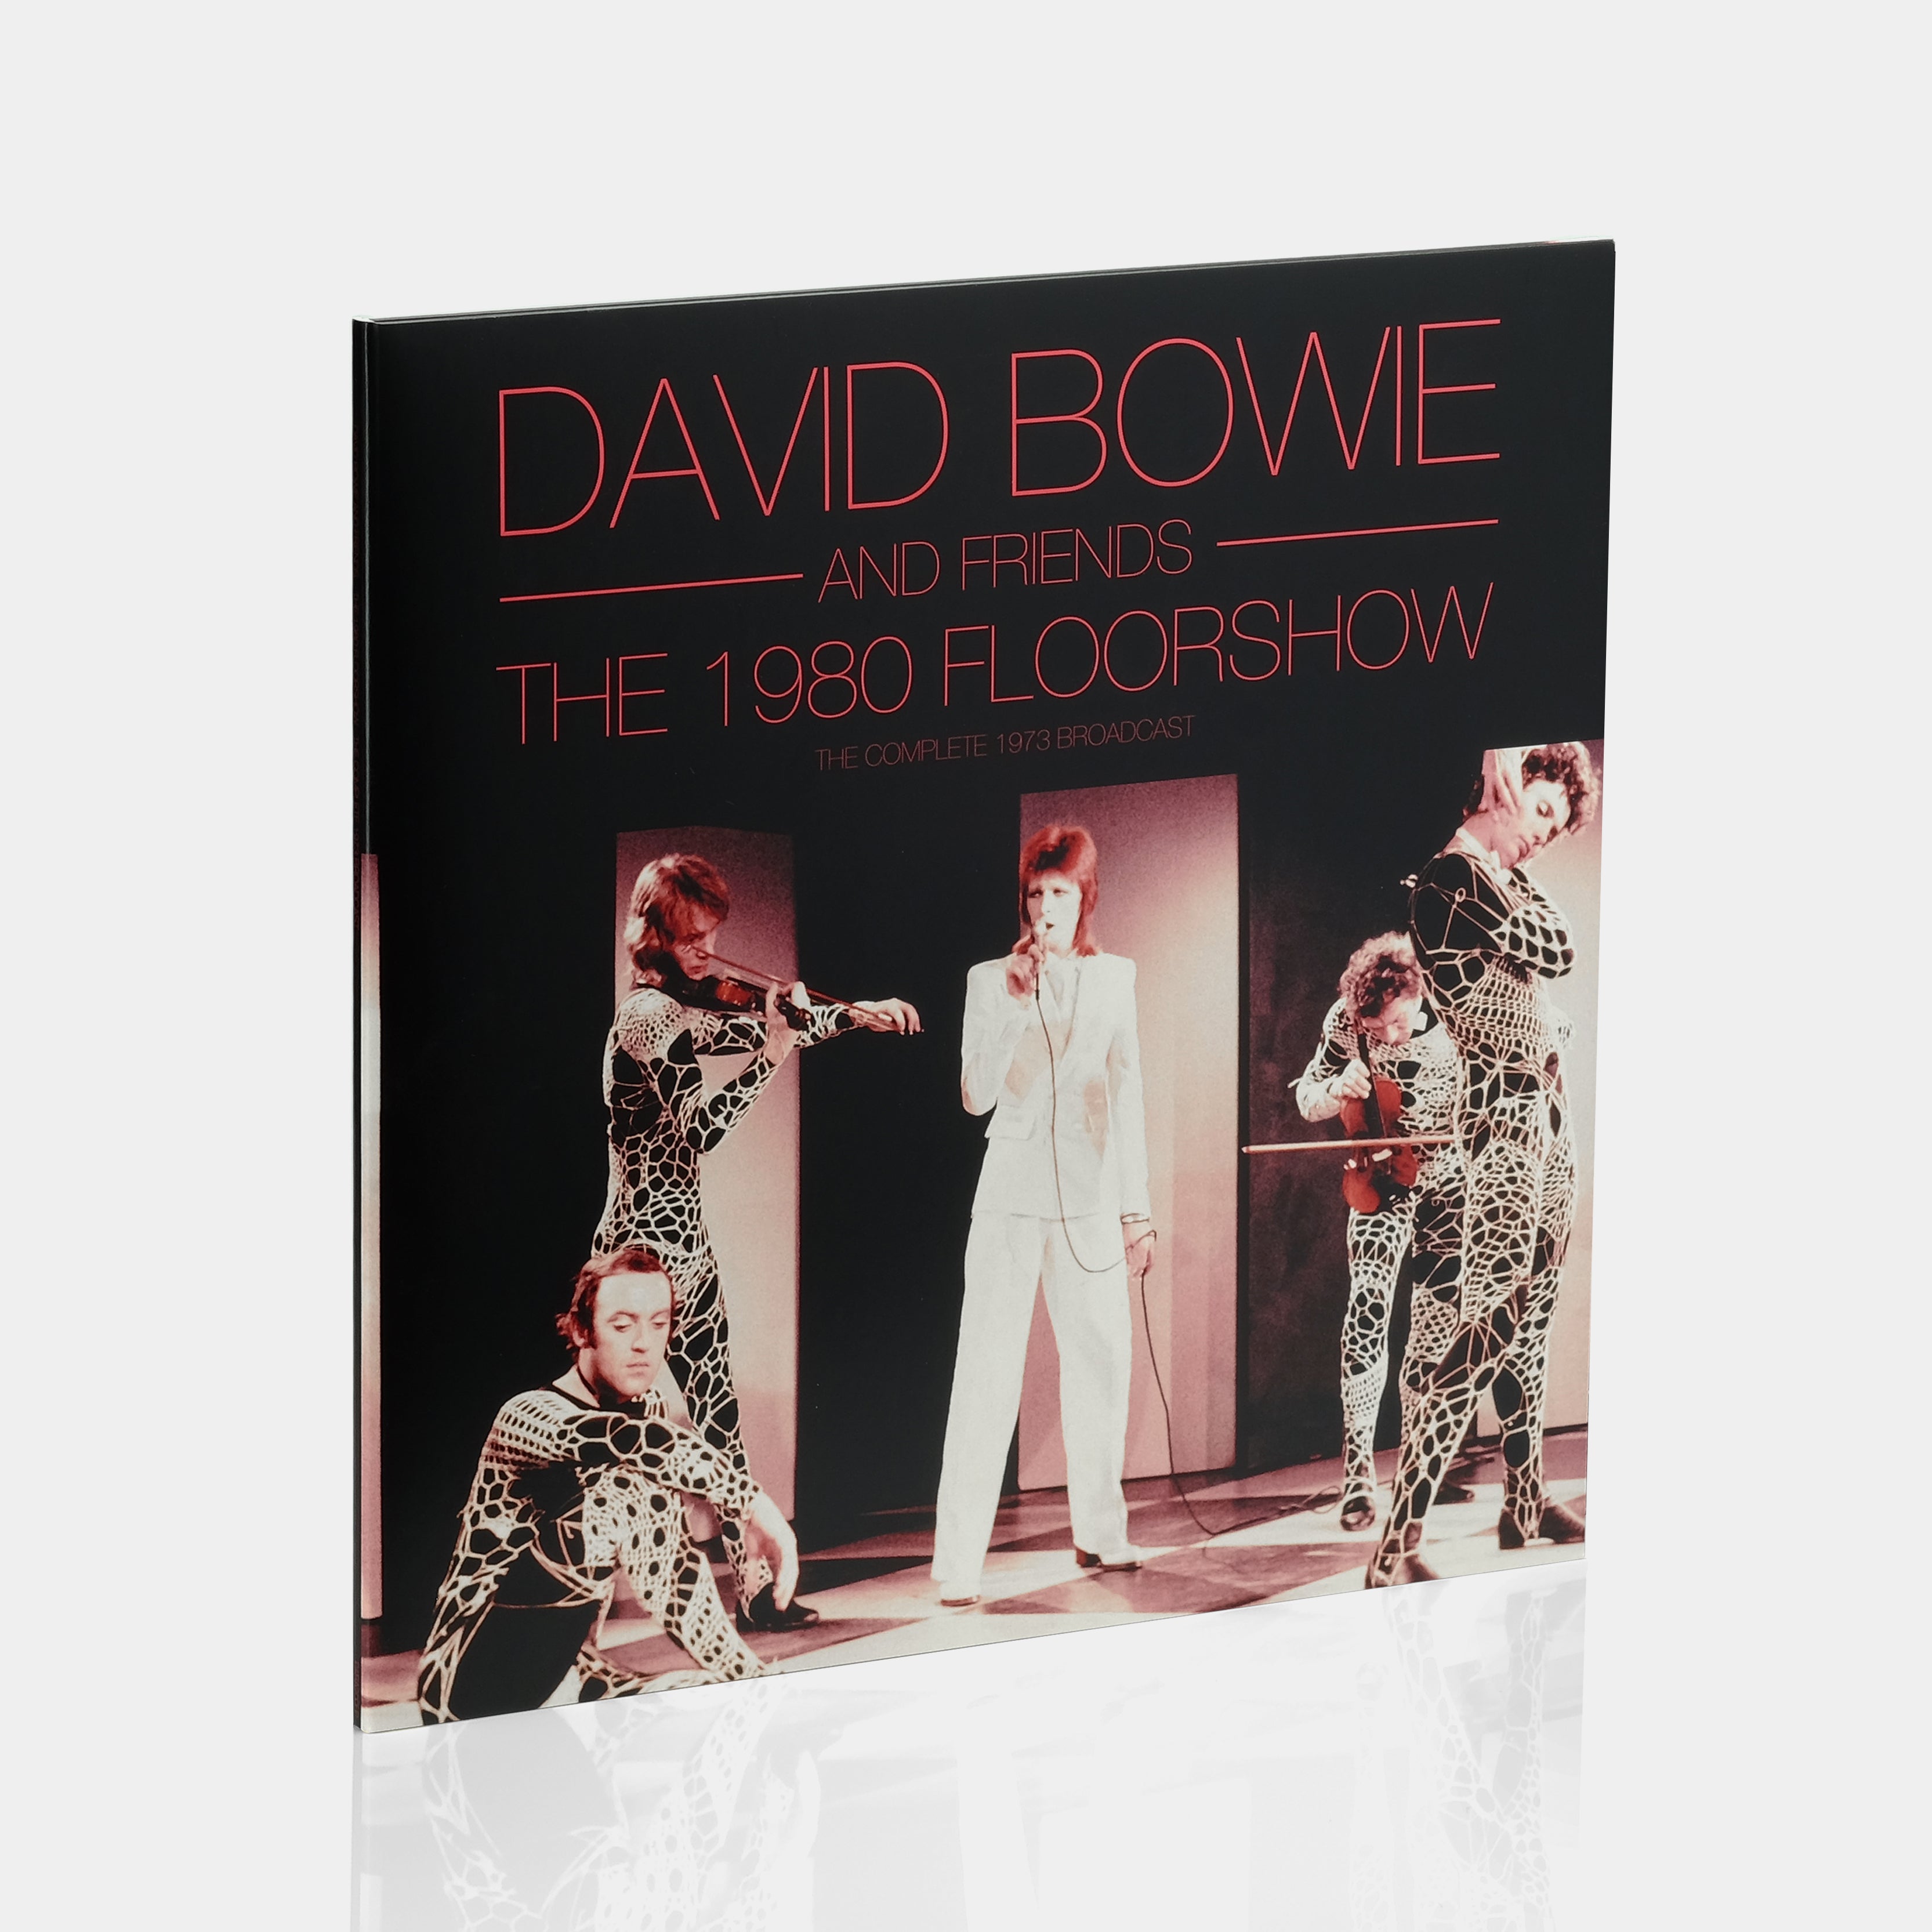 David Bowie and Friends - The 1980 Floor Show (The Complete 1973 Broadcast) 2xLP Vinyl Record